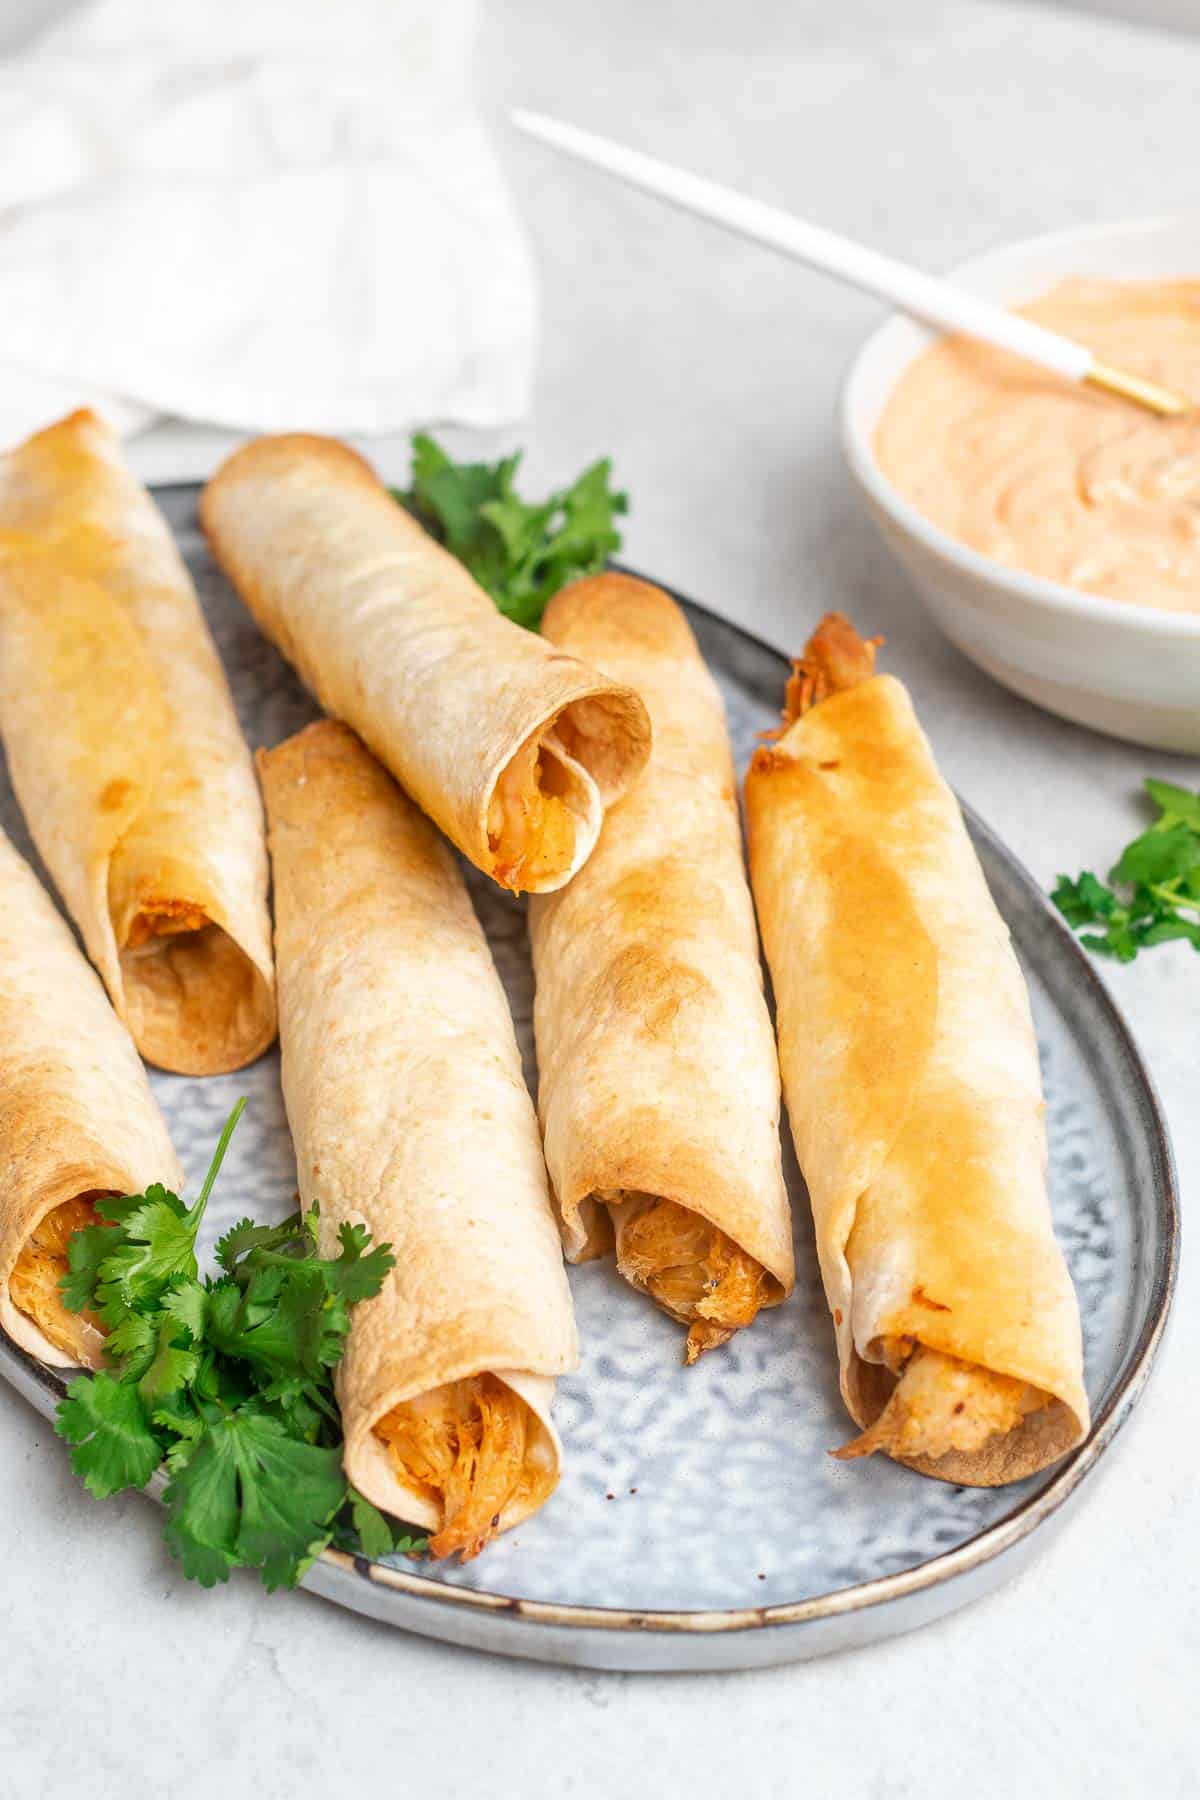 Six taquitos on a plate with fresh cilantro next to a white ramekin of sauce